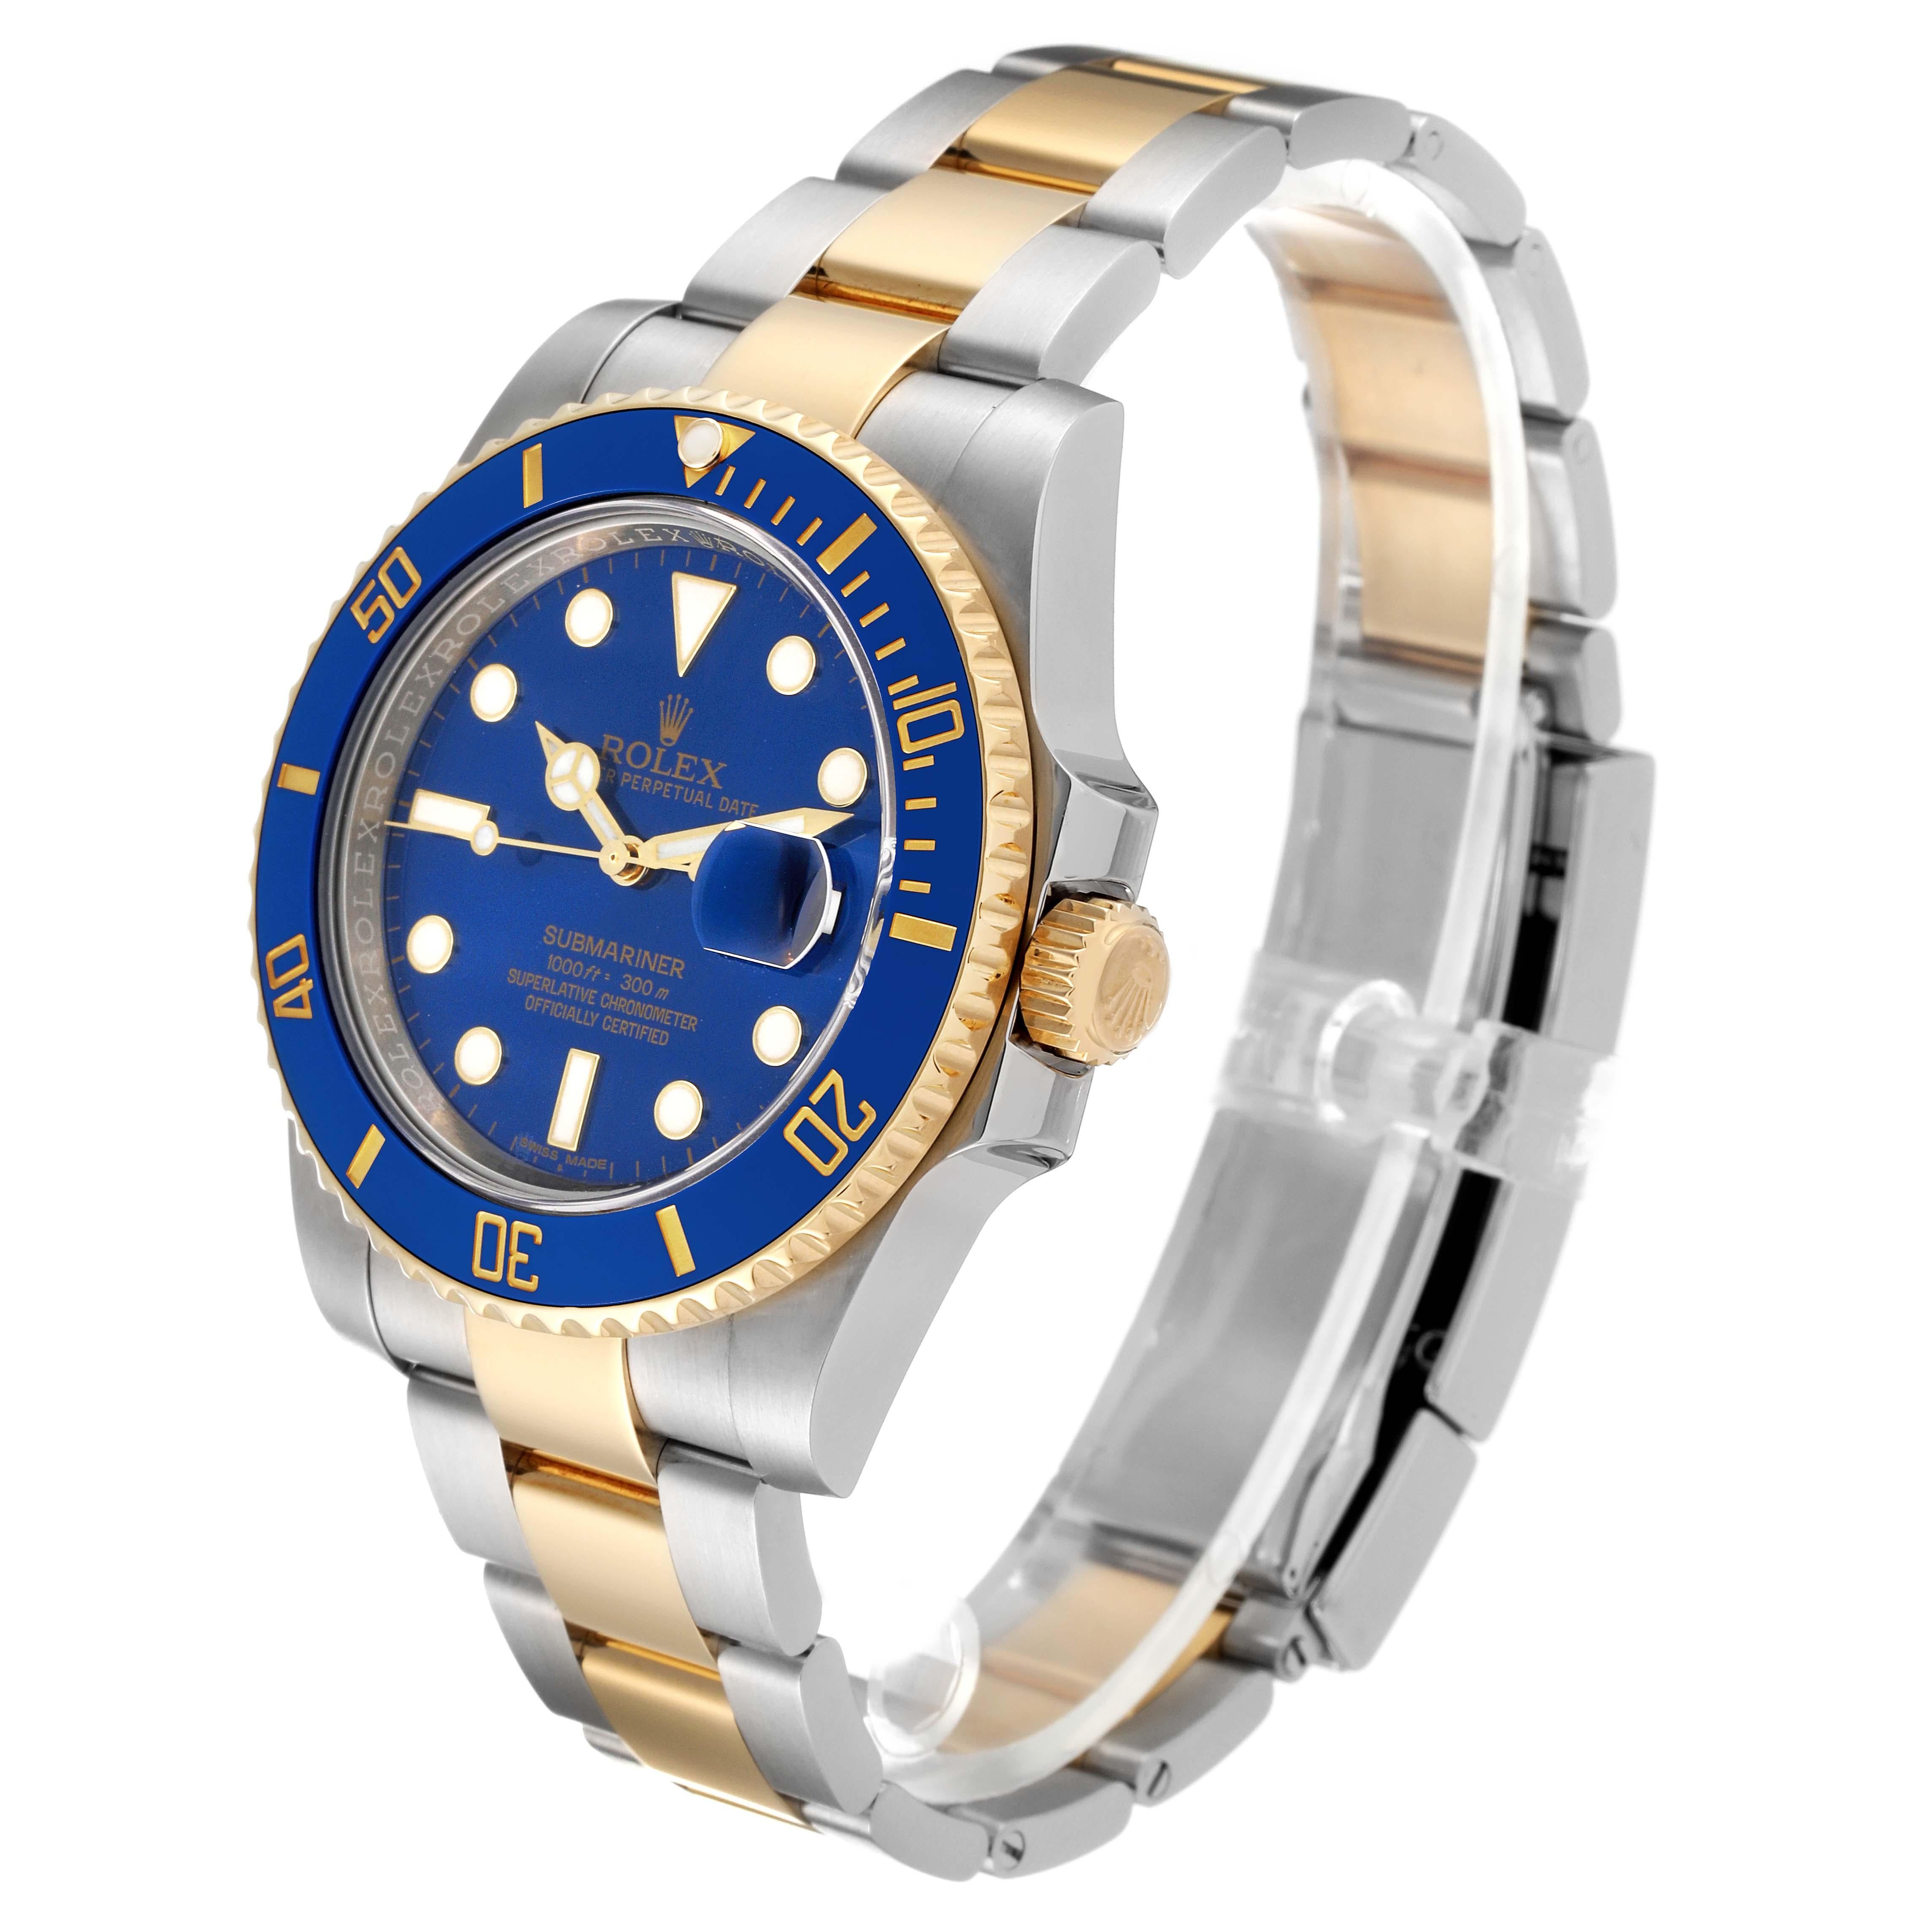 Rolex Submariner Steel Yellow Gold Blue Dial Mens Watch 116613 Box Card 3